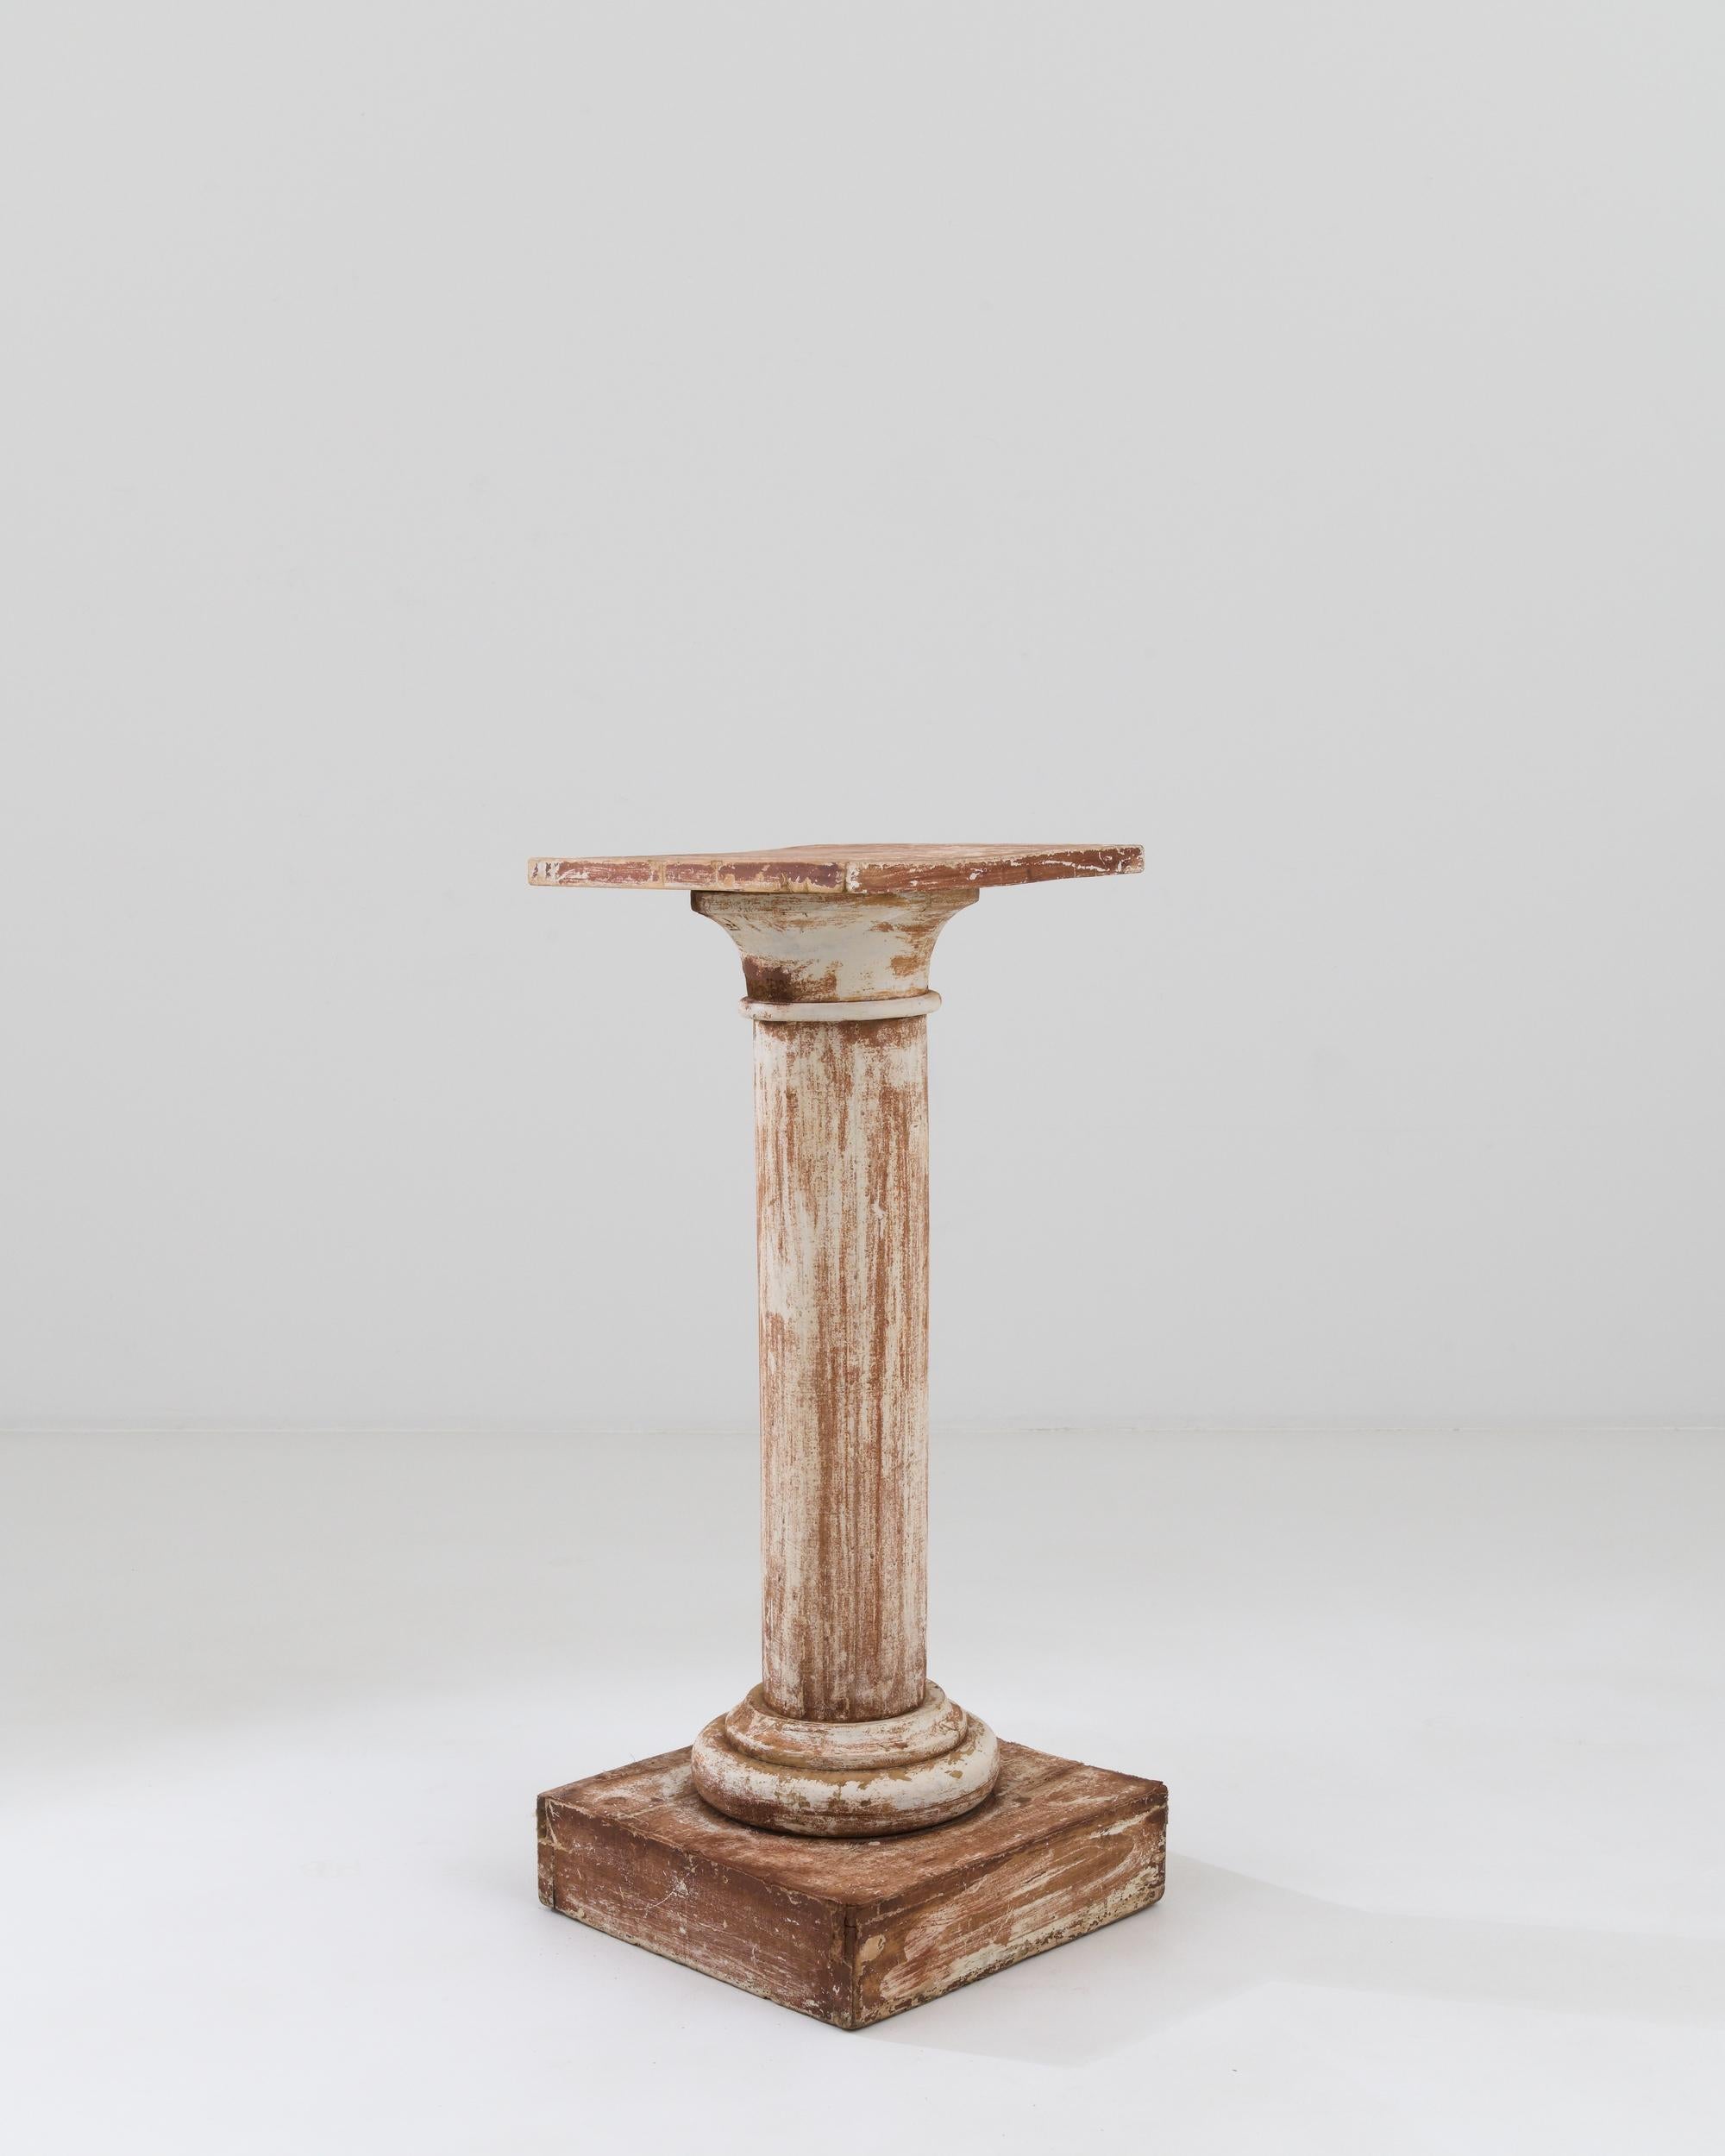 A wooden pedestal created in 19th century France. Presenting itself with a stoic poise, this simple yet elegant pedestal exudes charm and a sense of history. The white paint that coats the surface of the pedestal has long since begun to wear away